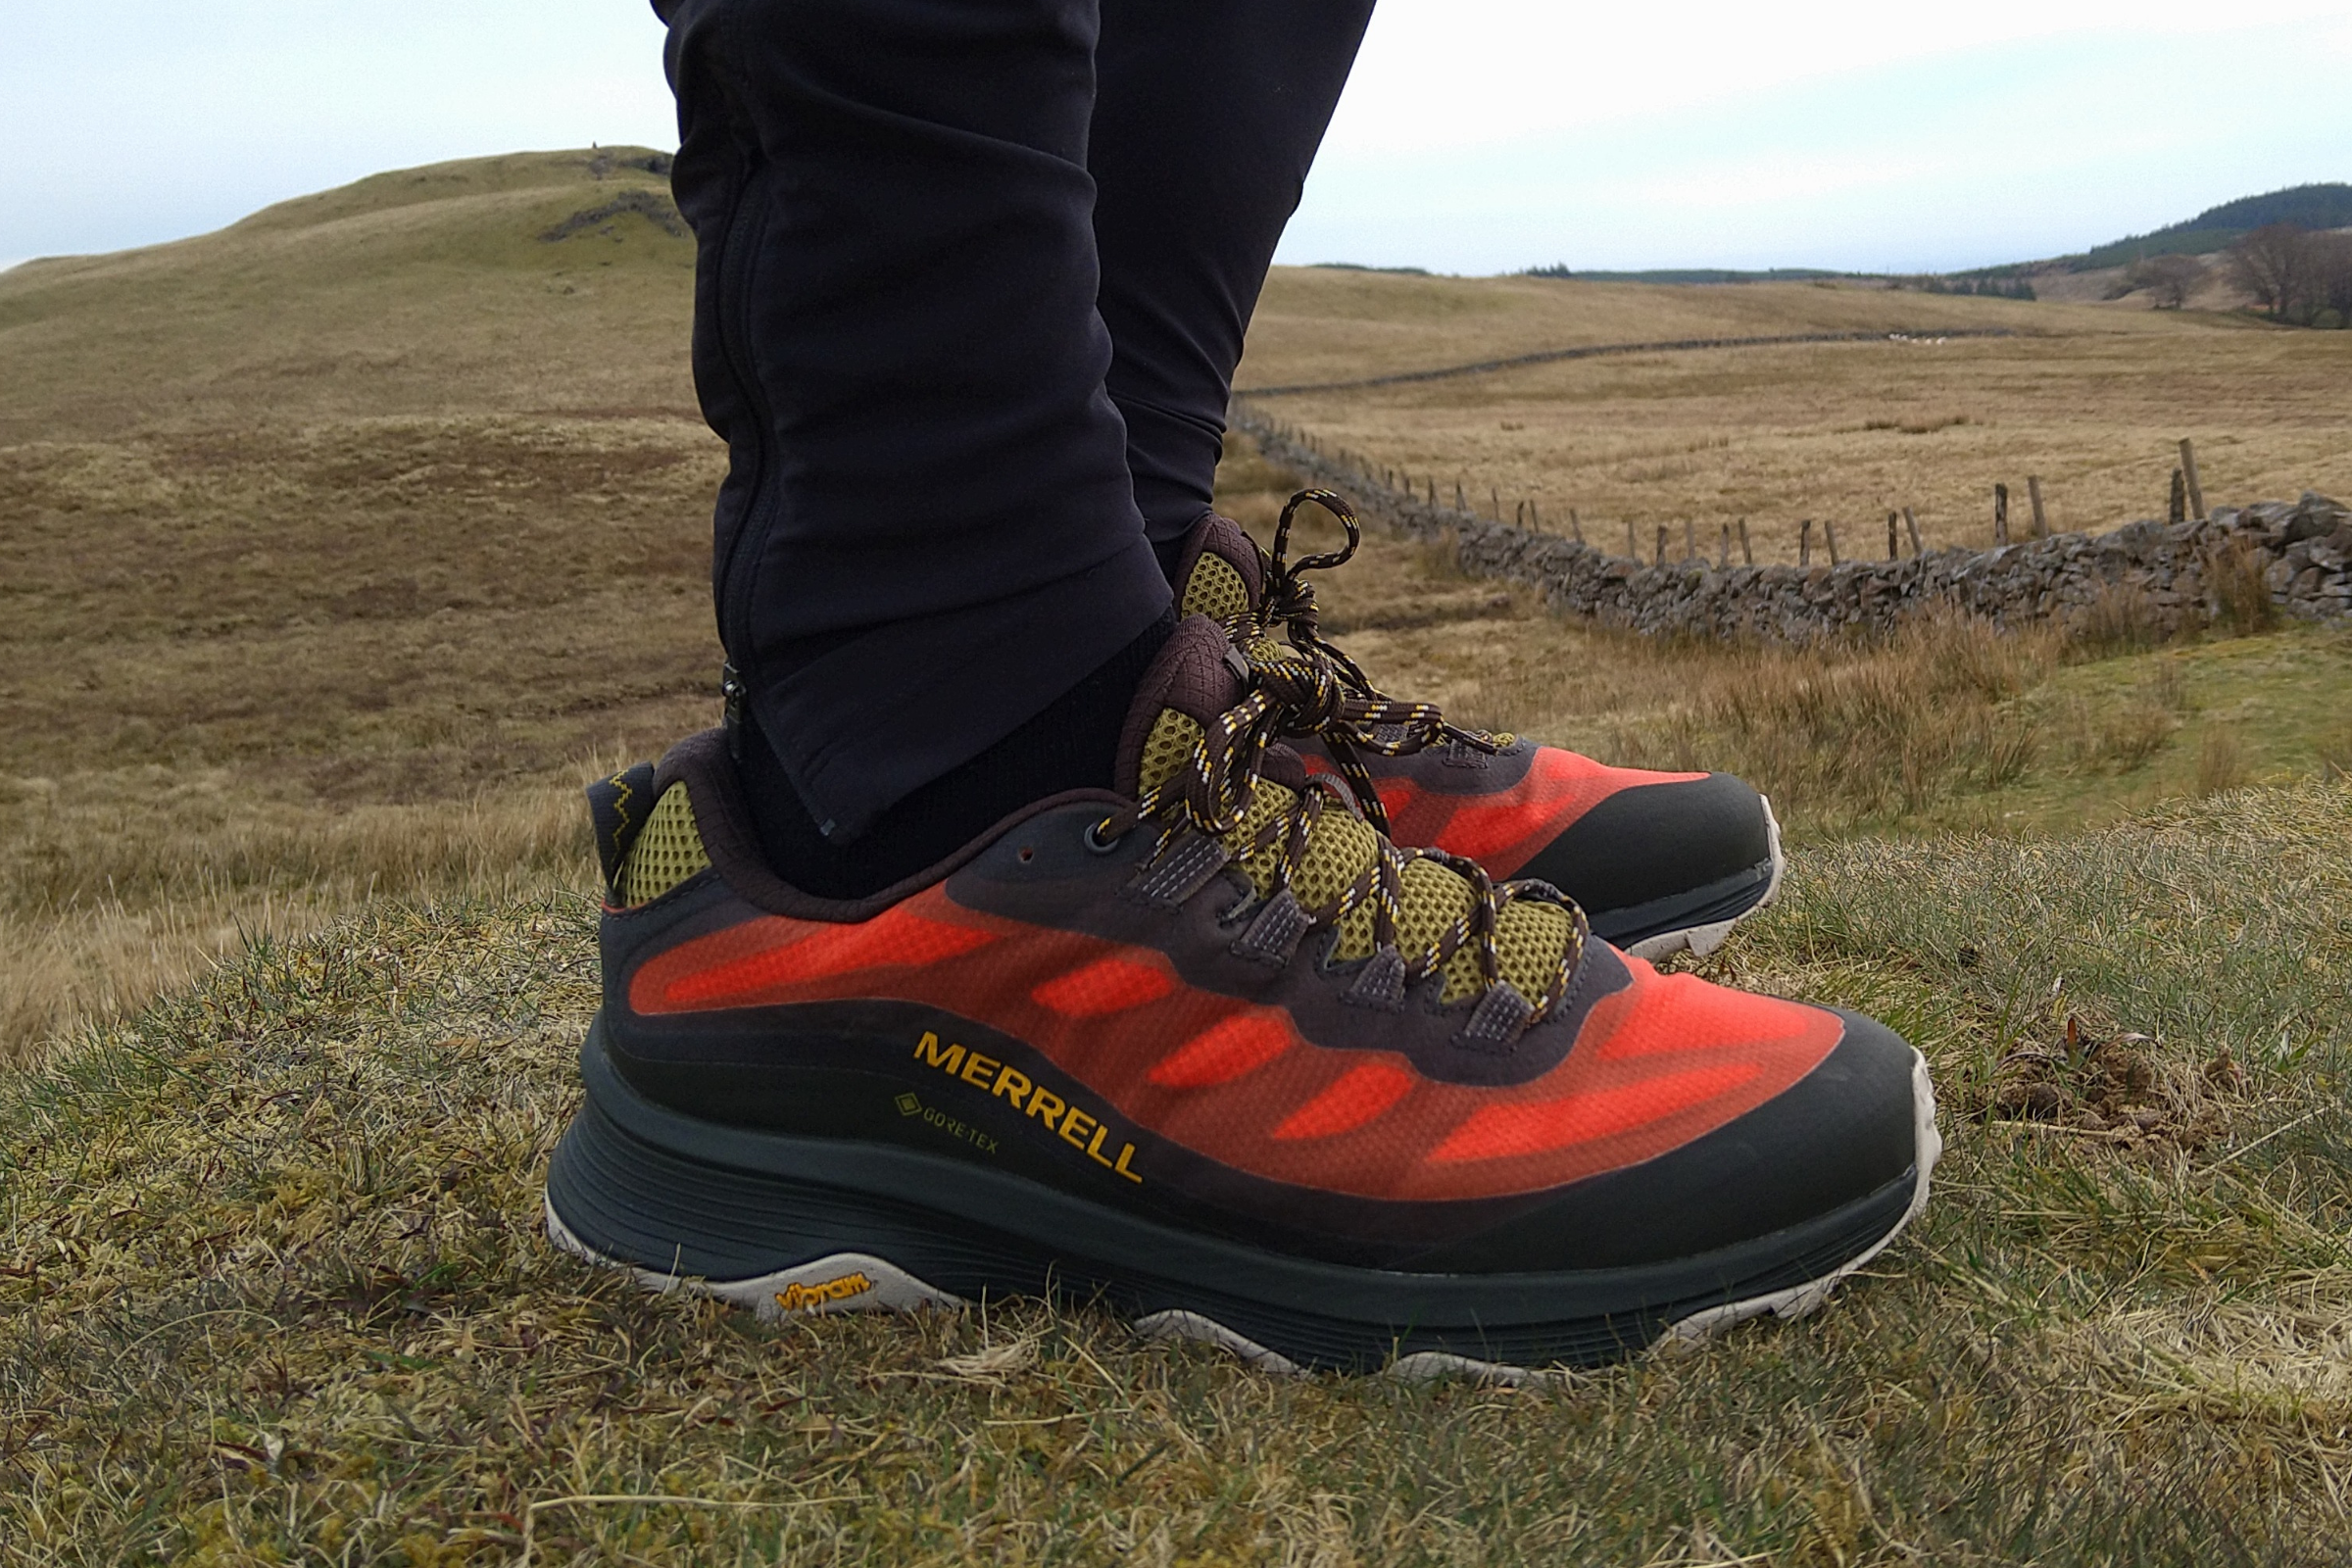 Merrell Moab Speed GORE-TEX trail shoes review